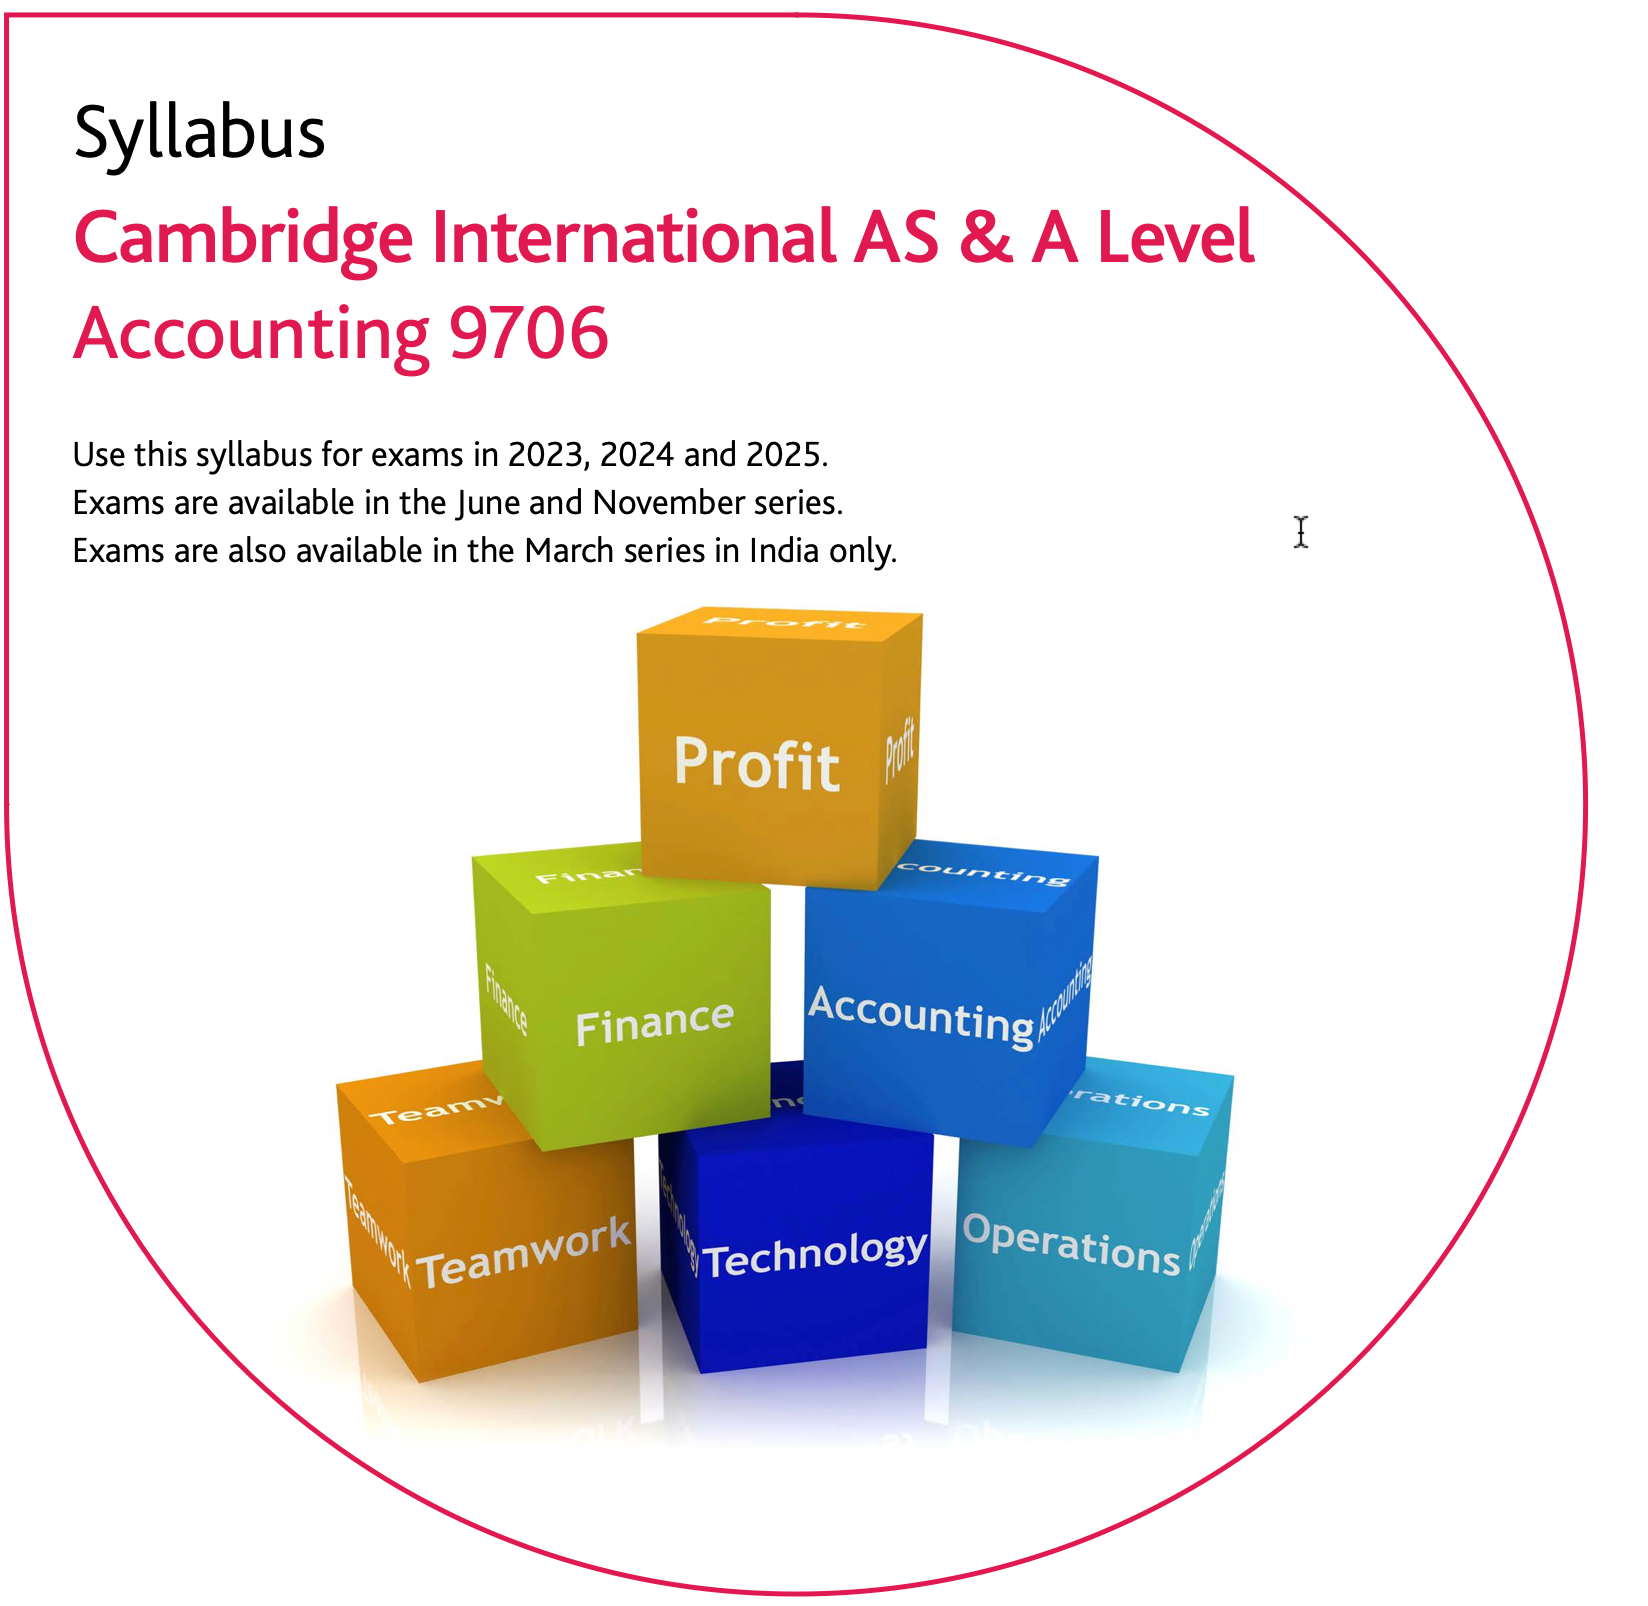 Cambridge International AS & A Level Accounting (9706)